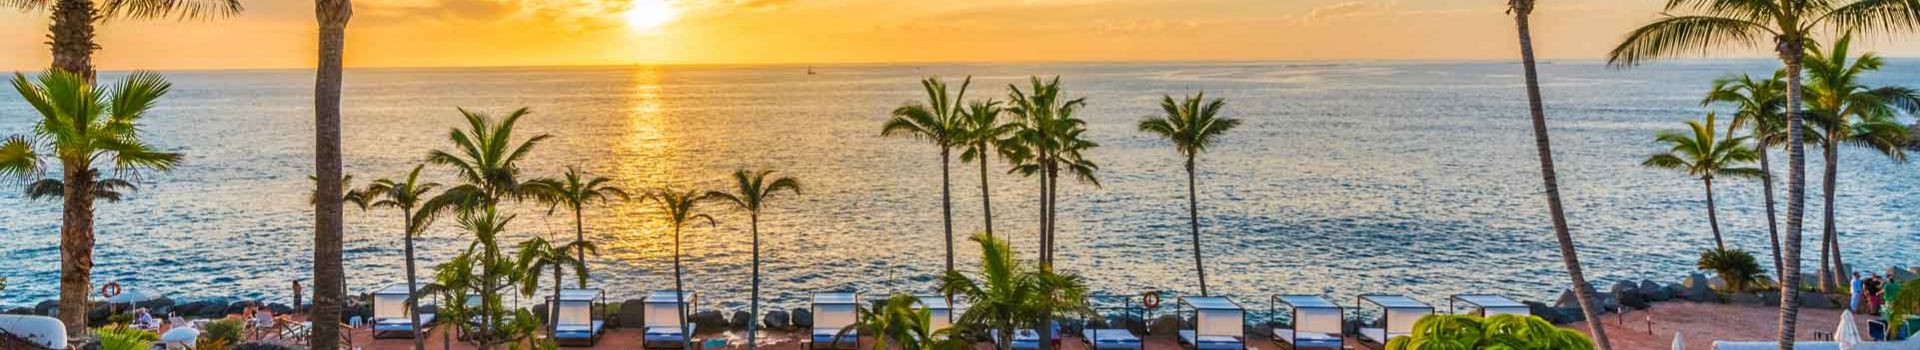 All inclusive family holidays to Tenerife with Cassidy Travel